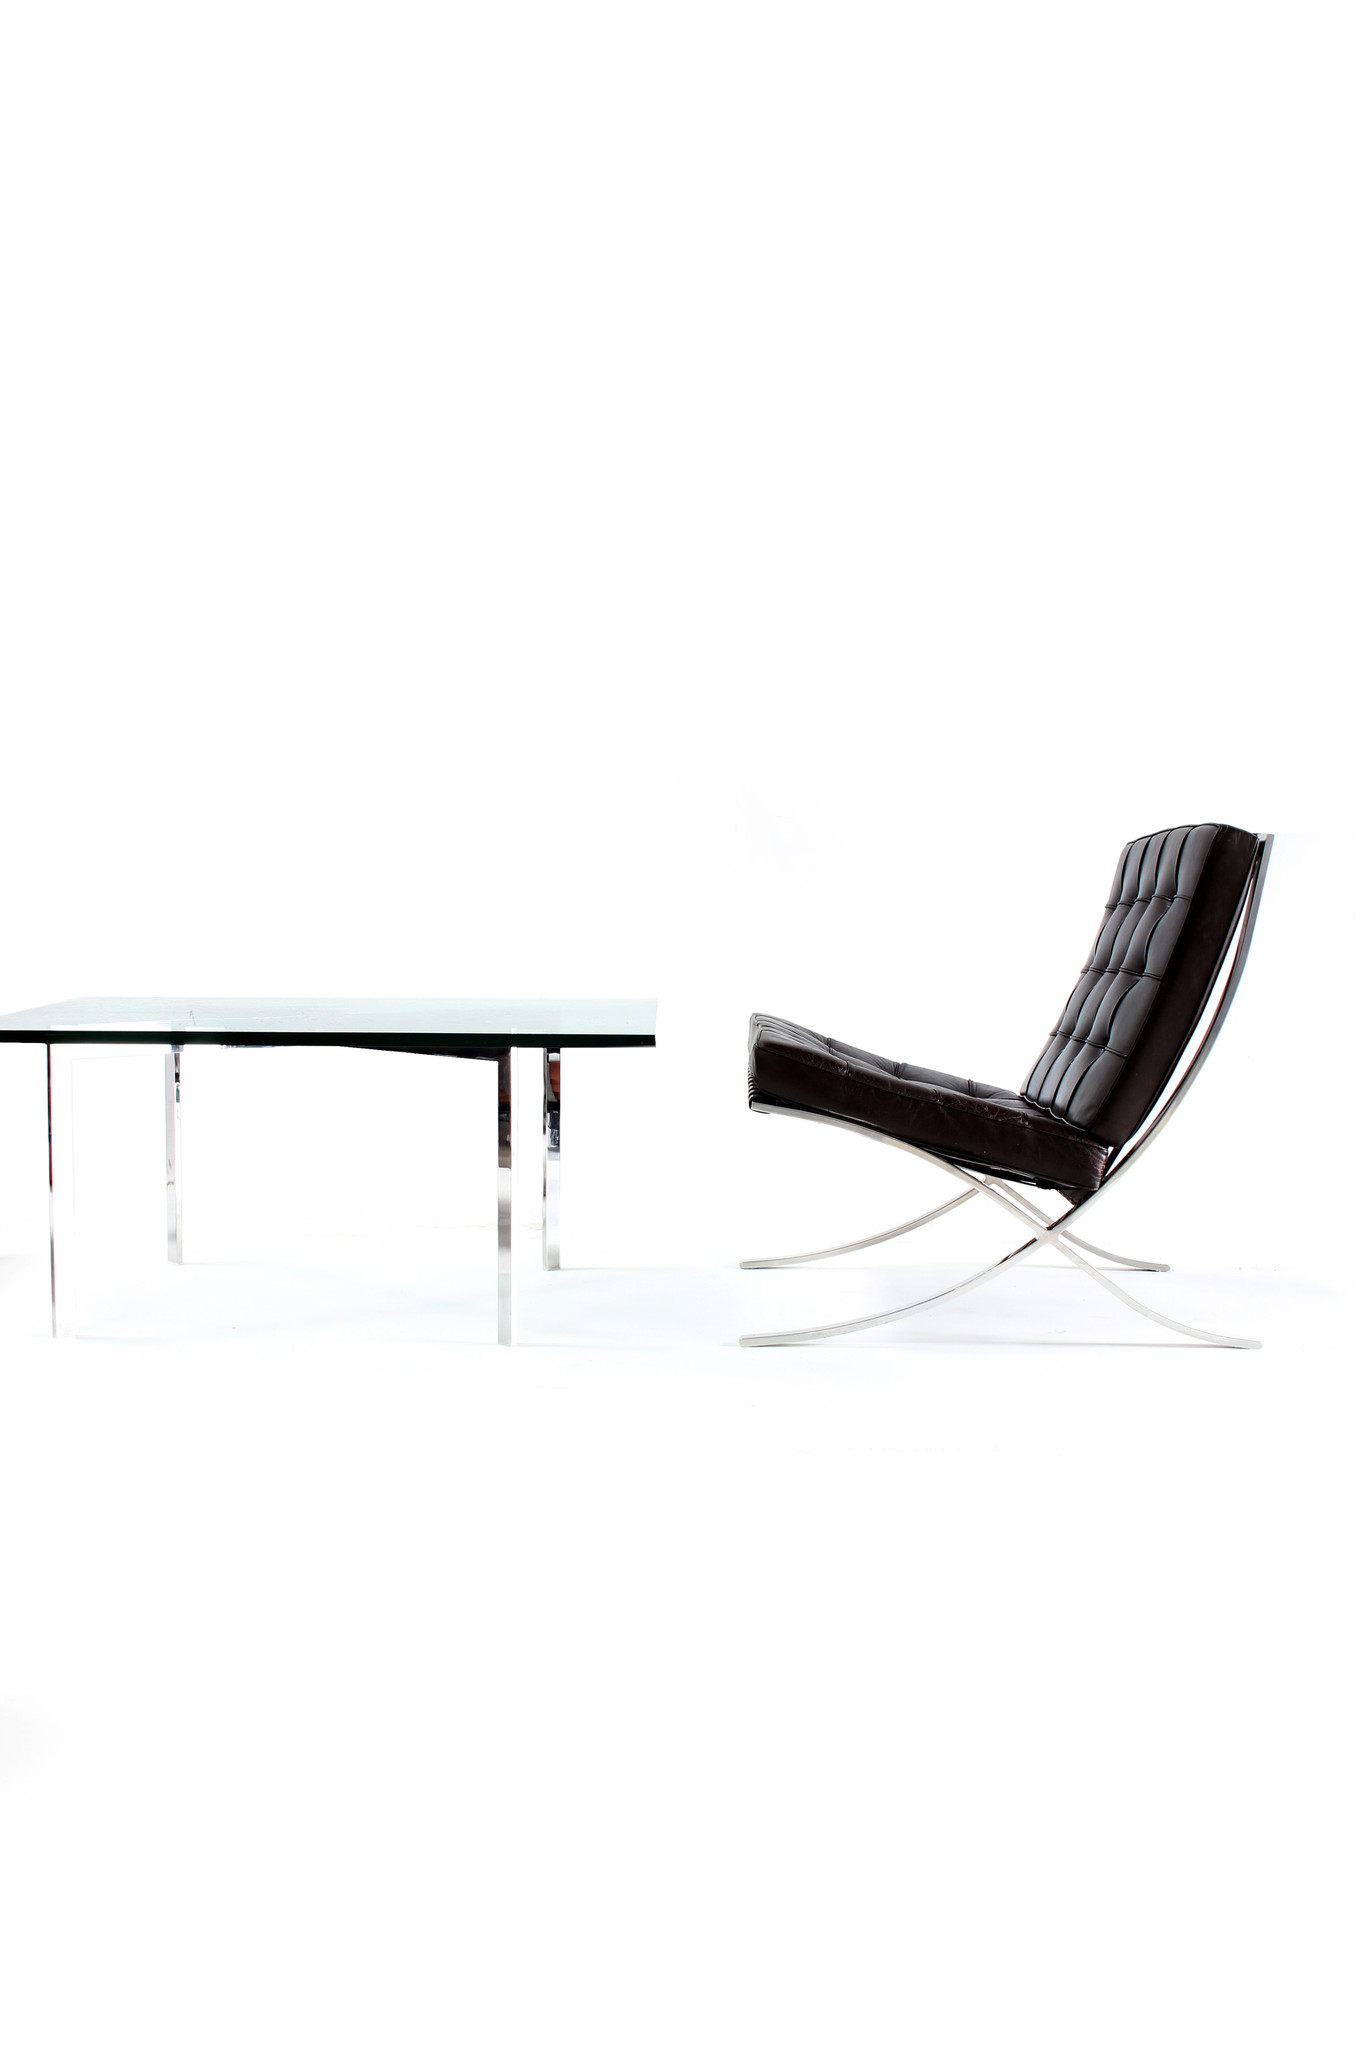 Coffee table "Barcelona" designed by Mies van der Rohe for Knoll